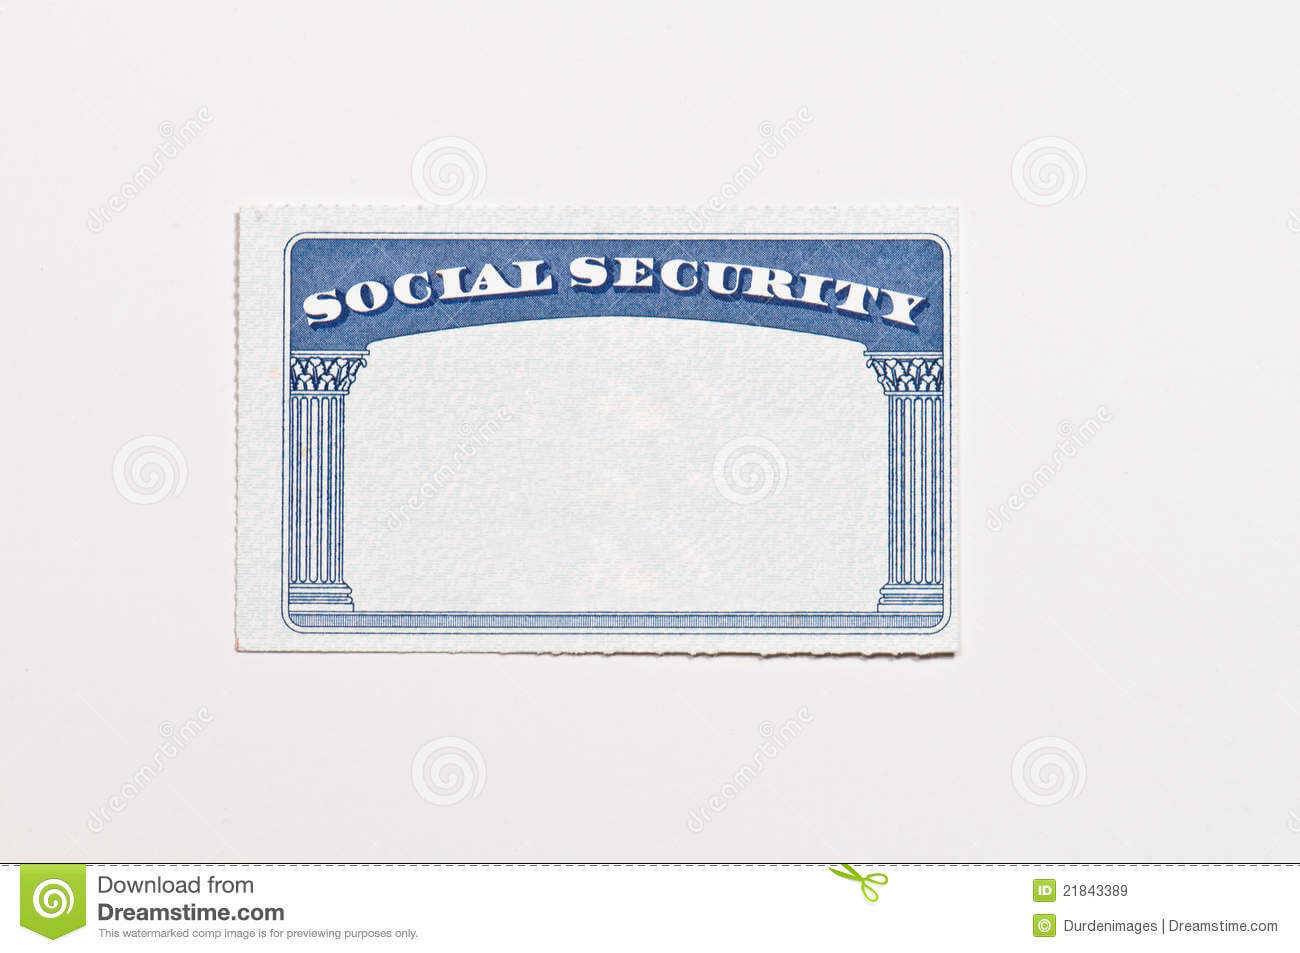 Blank Social Security Card Stock Image. Image Of Document With Social Security Card Template Download